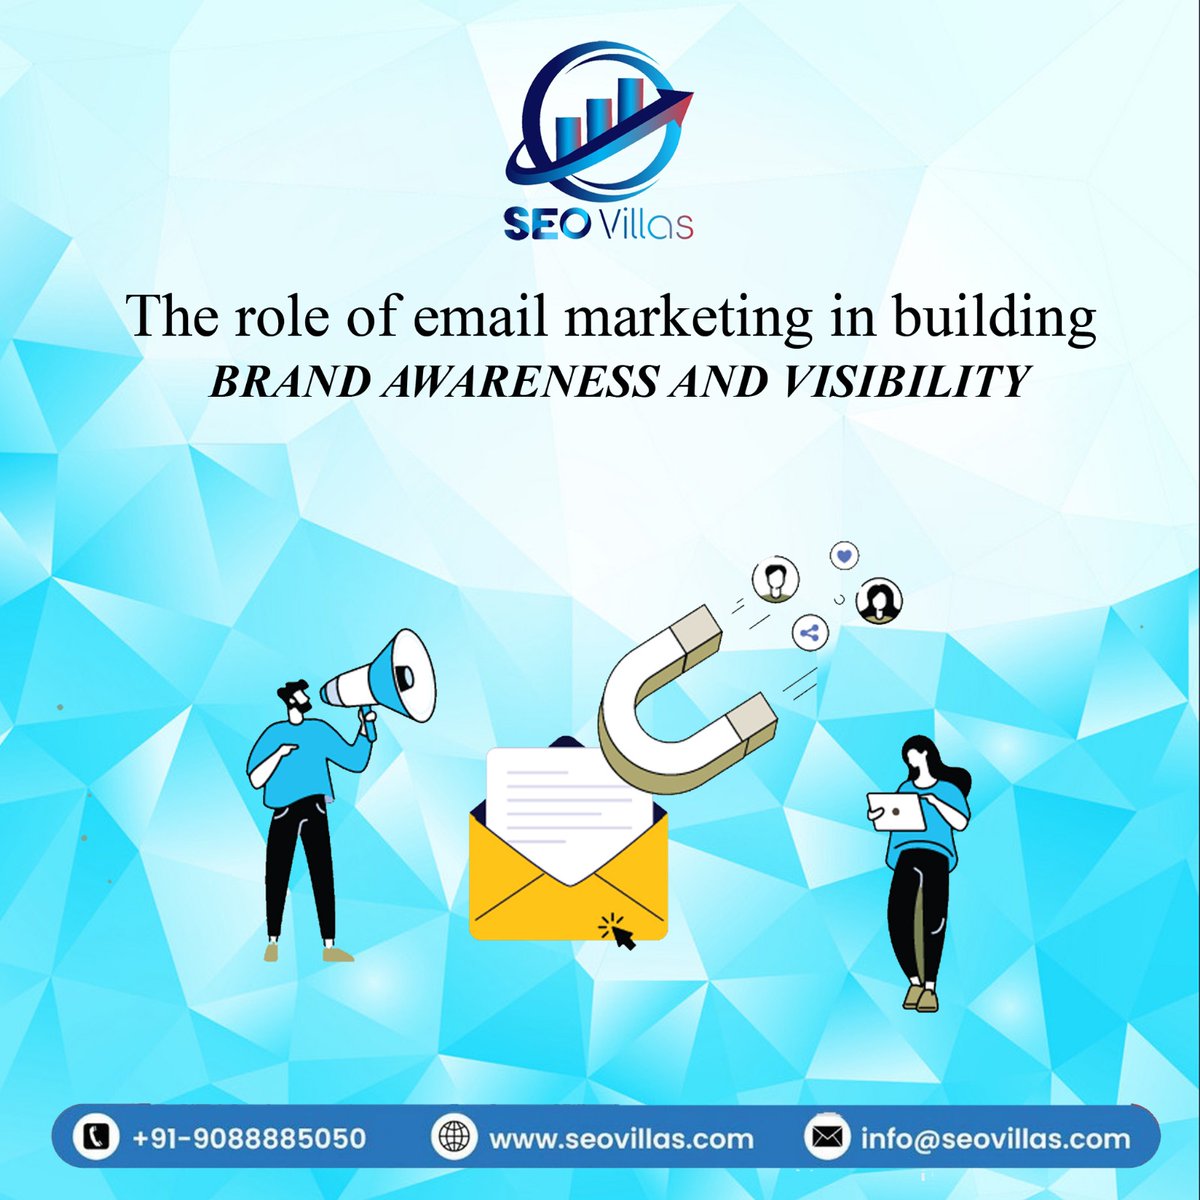 Don't underestimate the power of email! It's a great way to build brand awareness & get your name out there. Targeted messages, straight to inboxes, more visibility for your business! seovillas.com/services/email… #digitalmarketing #contentmarketing #emailmarketing